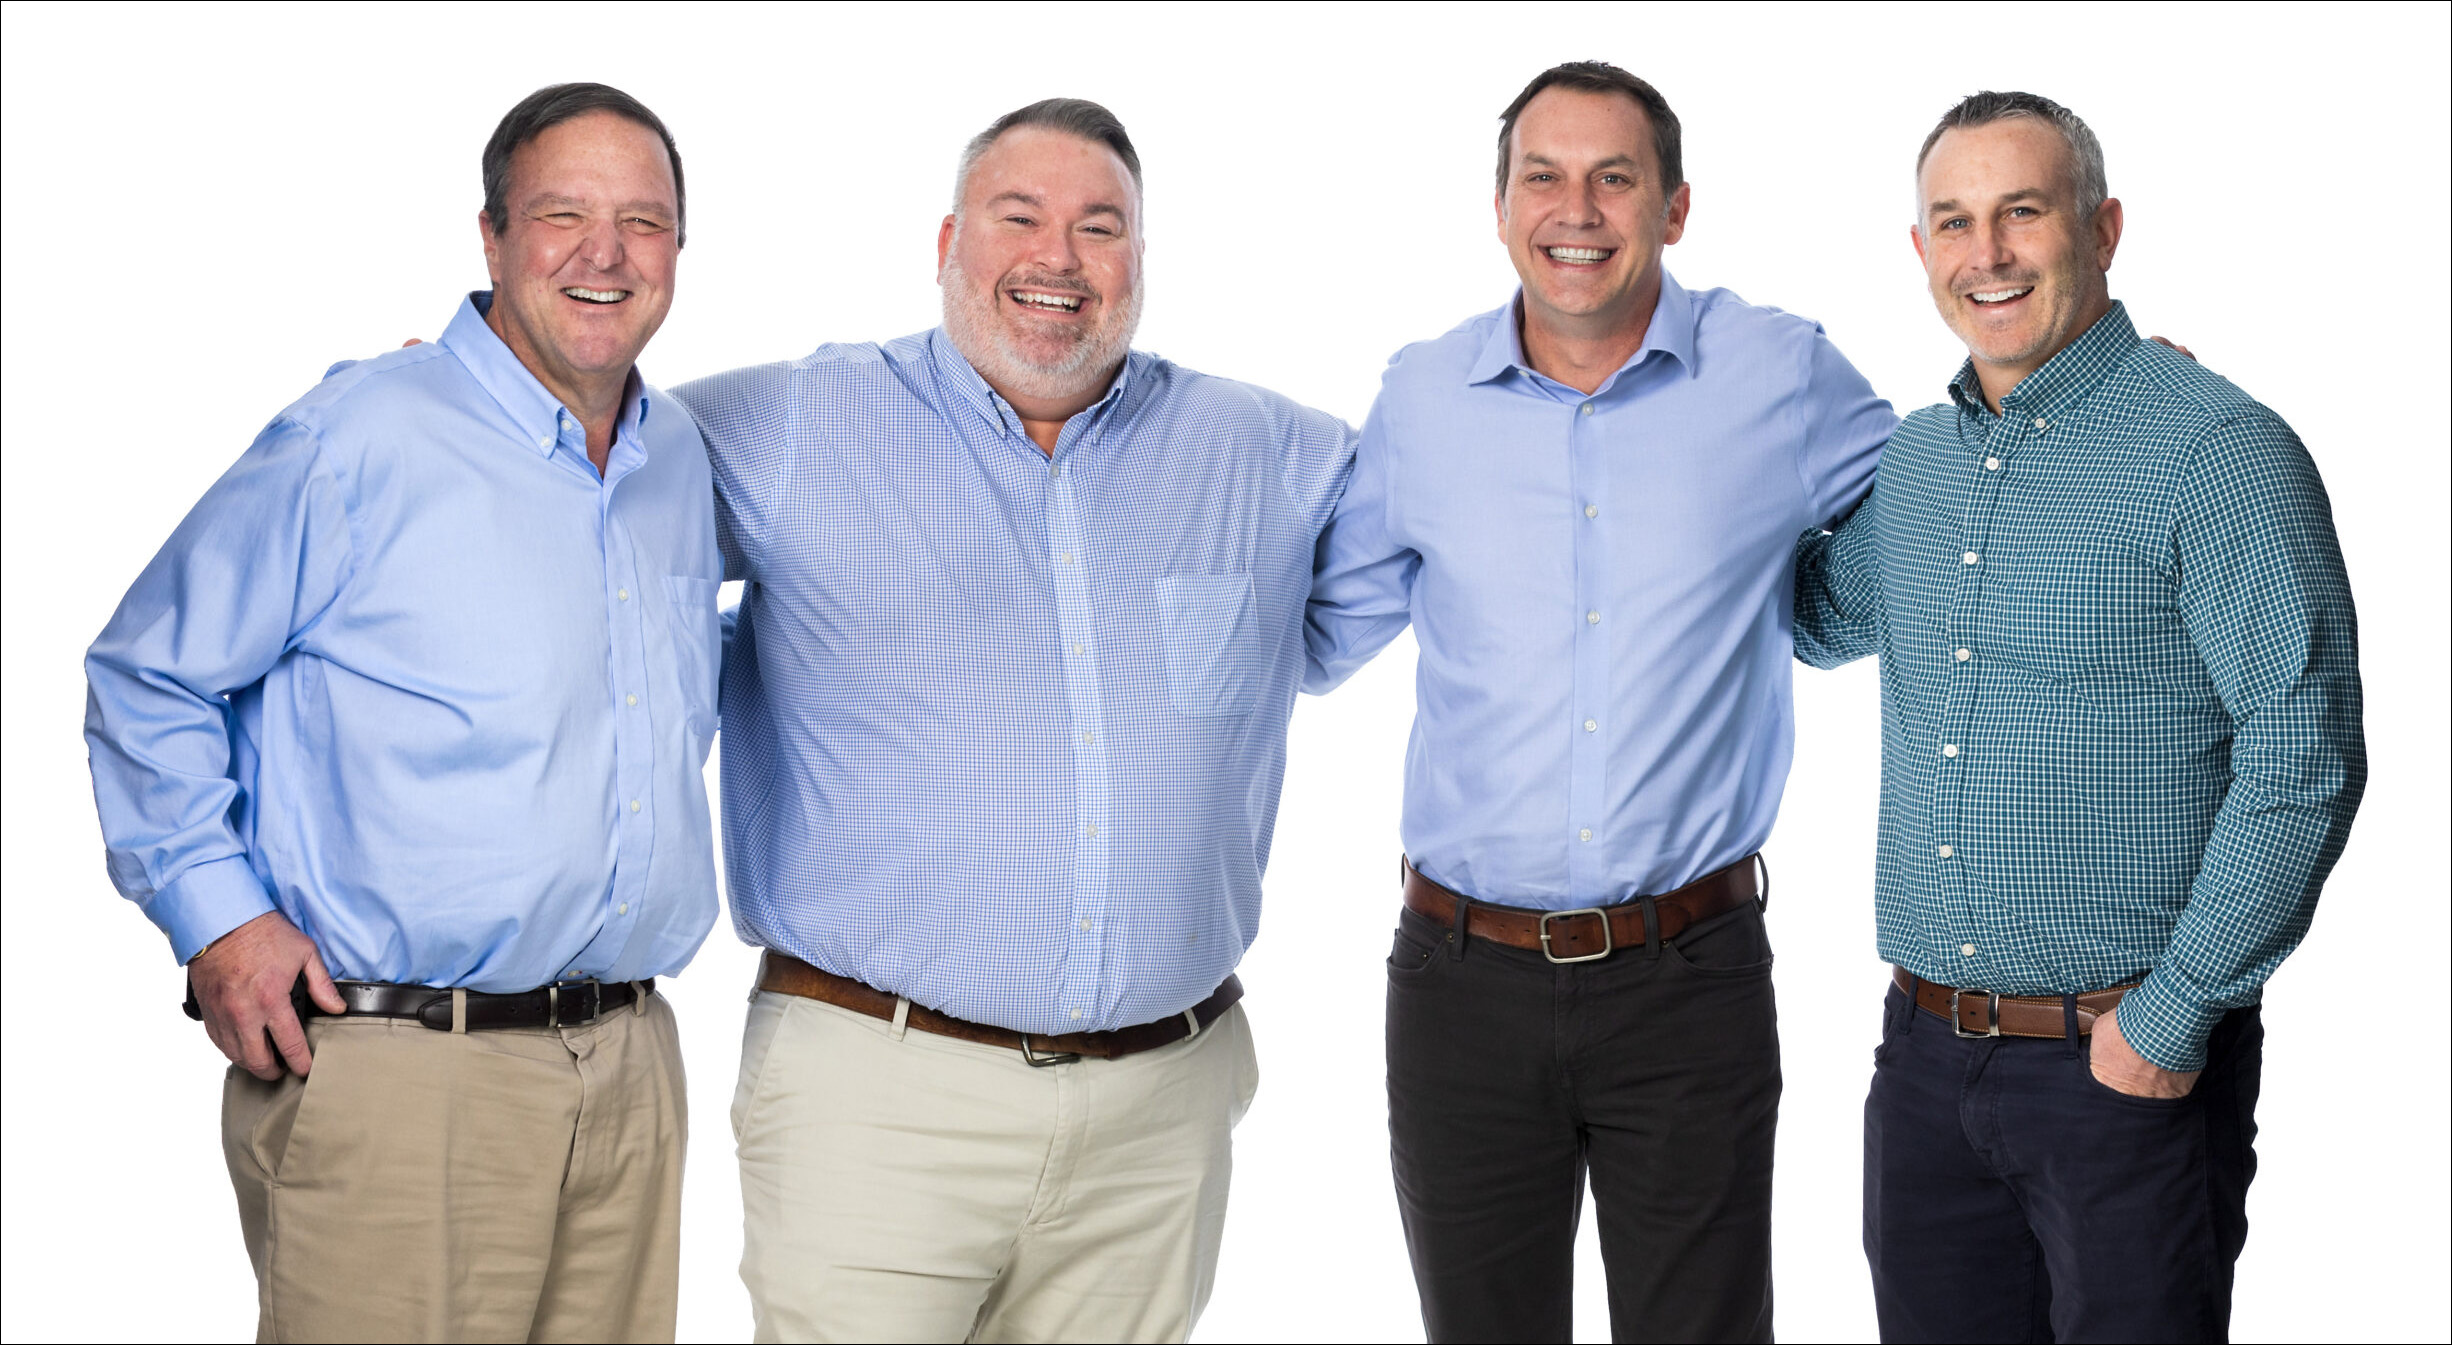 The CHE ownership team, from left to right, Frank Wiesner, Scott Burrell, Jeremy, Josh Menold.